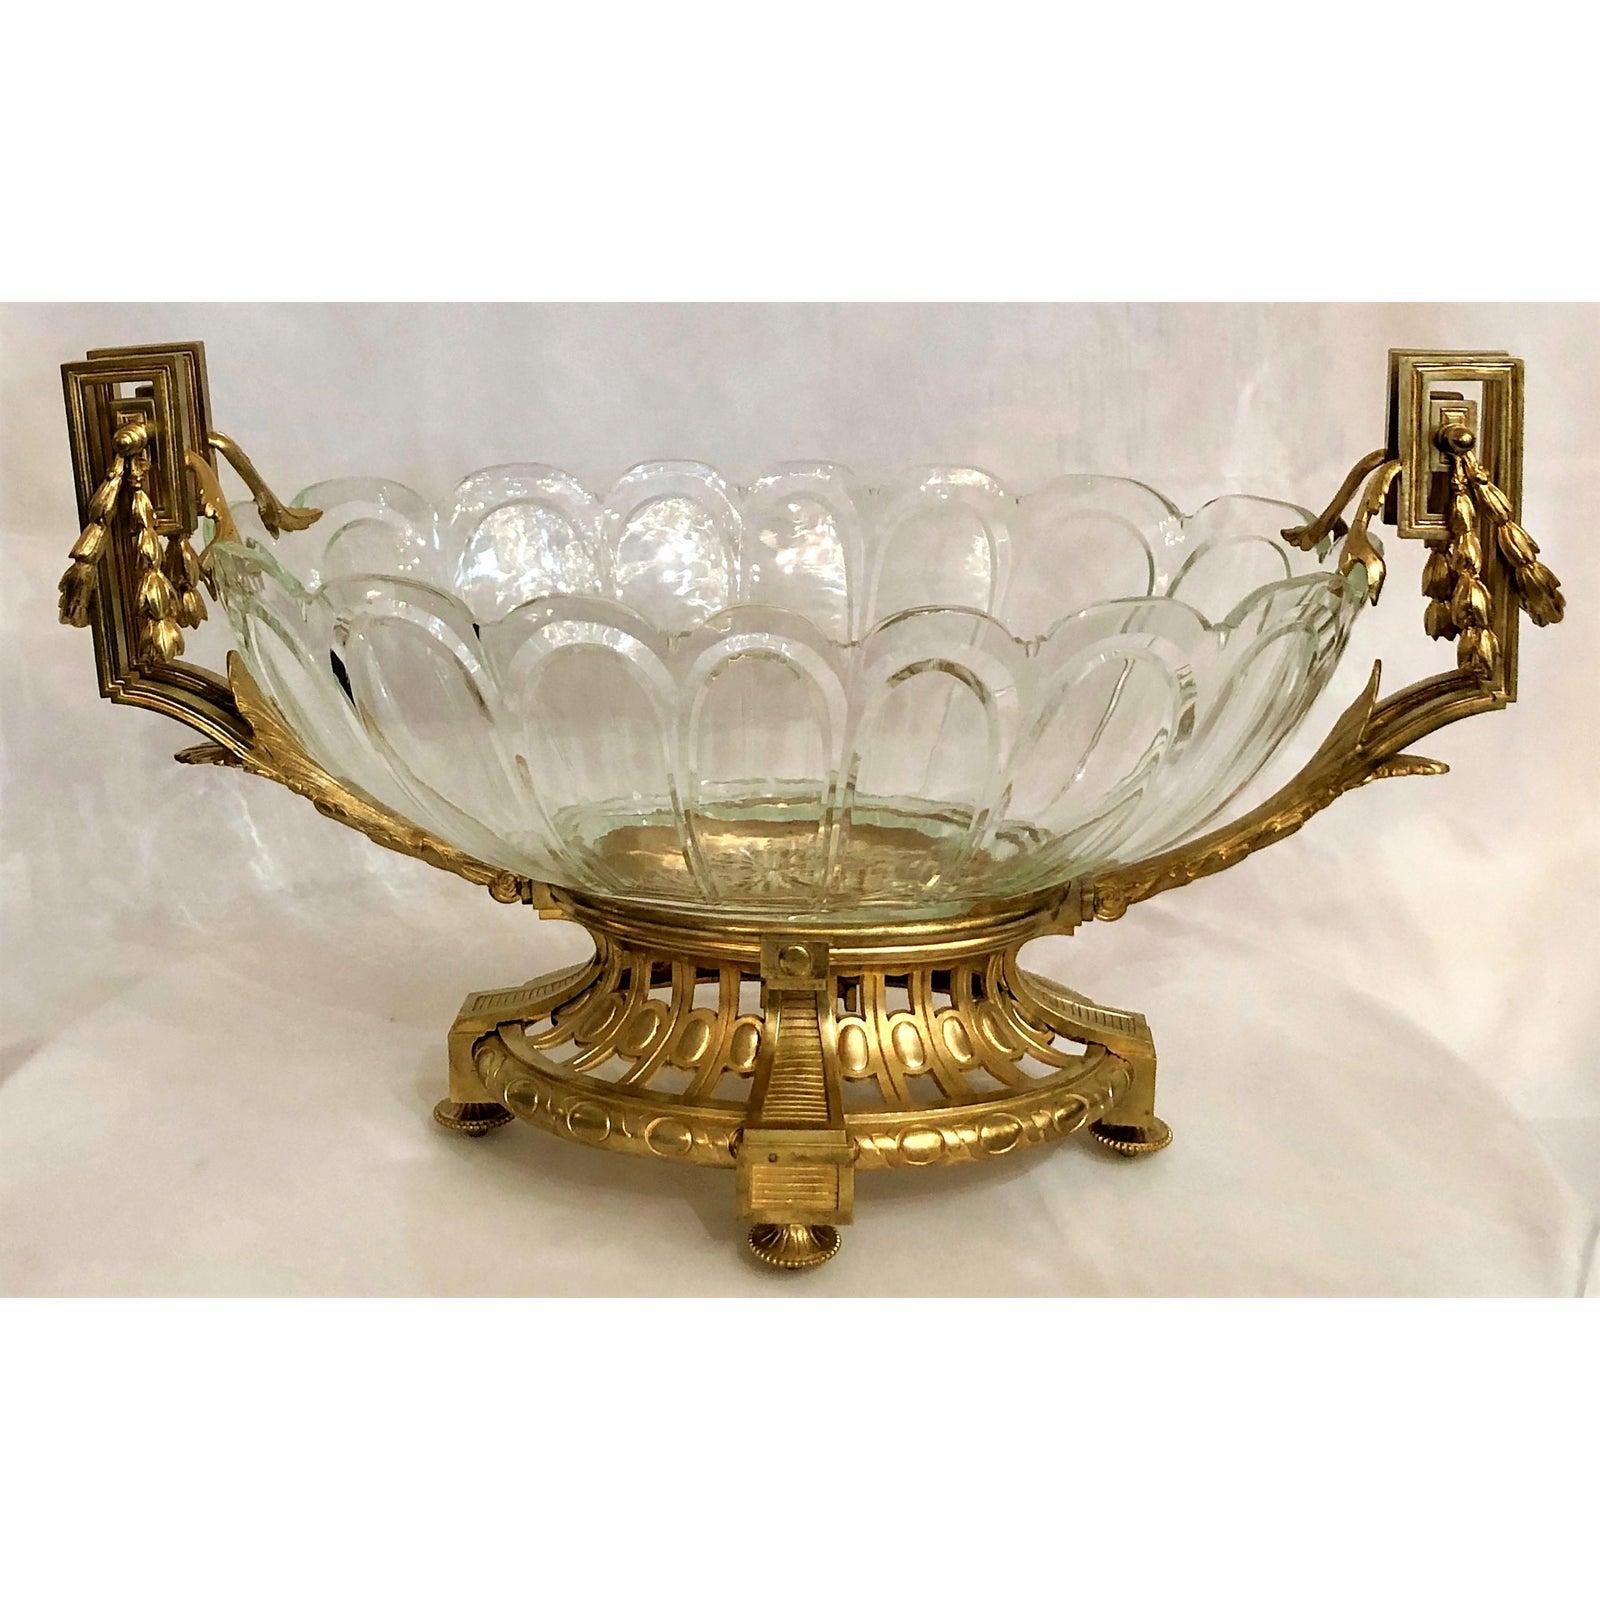 Antique French Baccarat crystal and gold bronze centerpiece epergne, circa 1880.
 